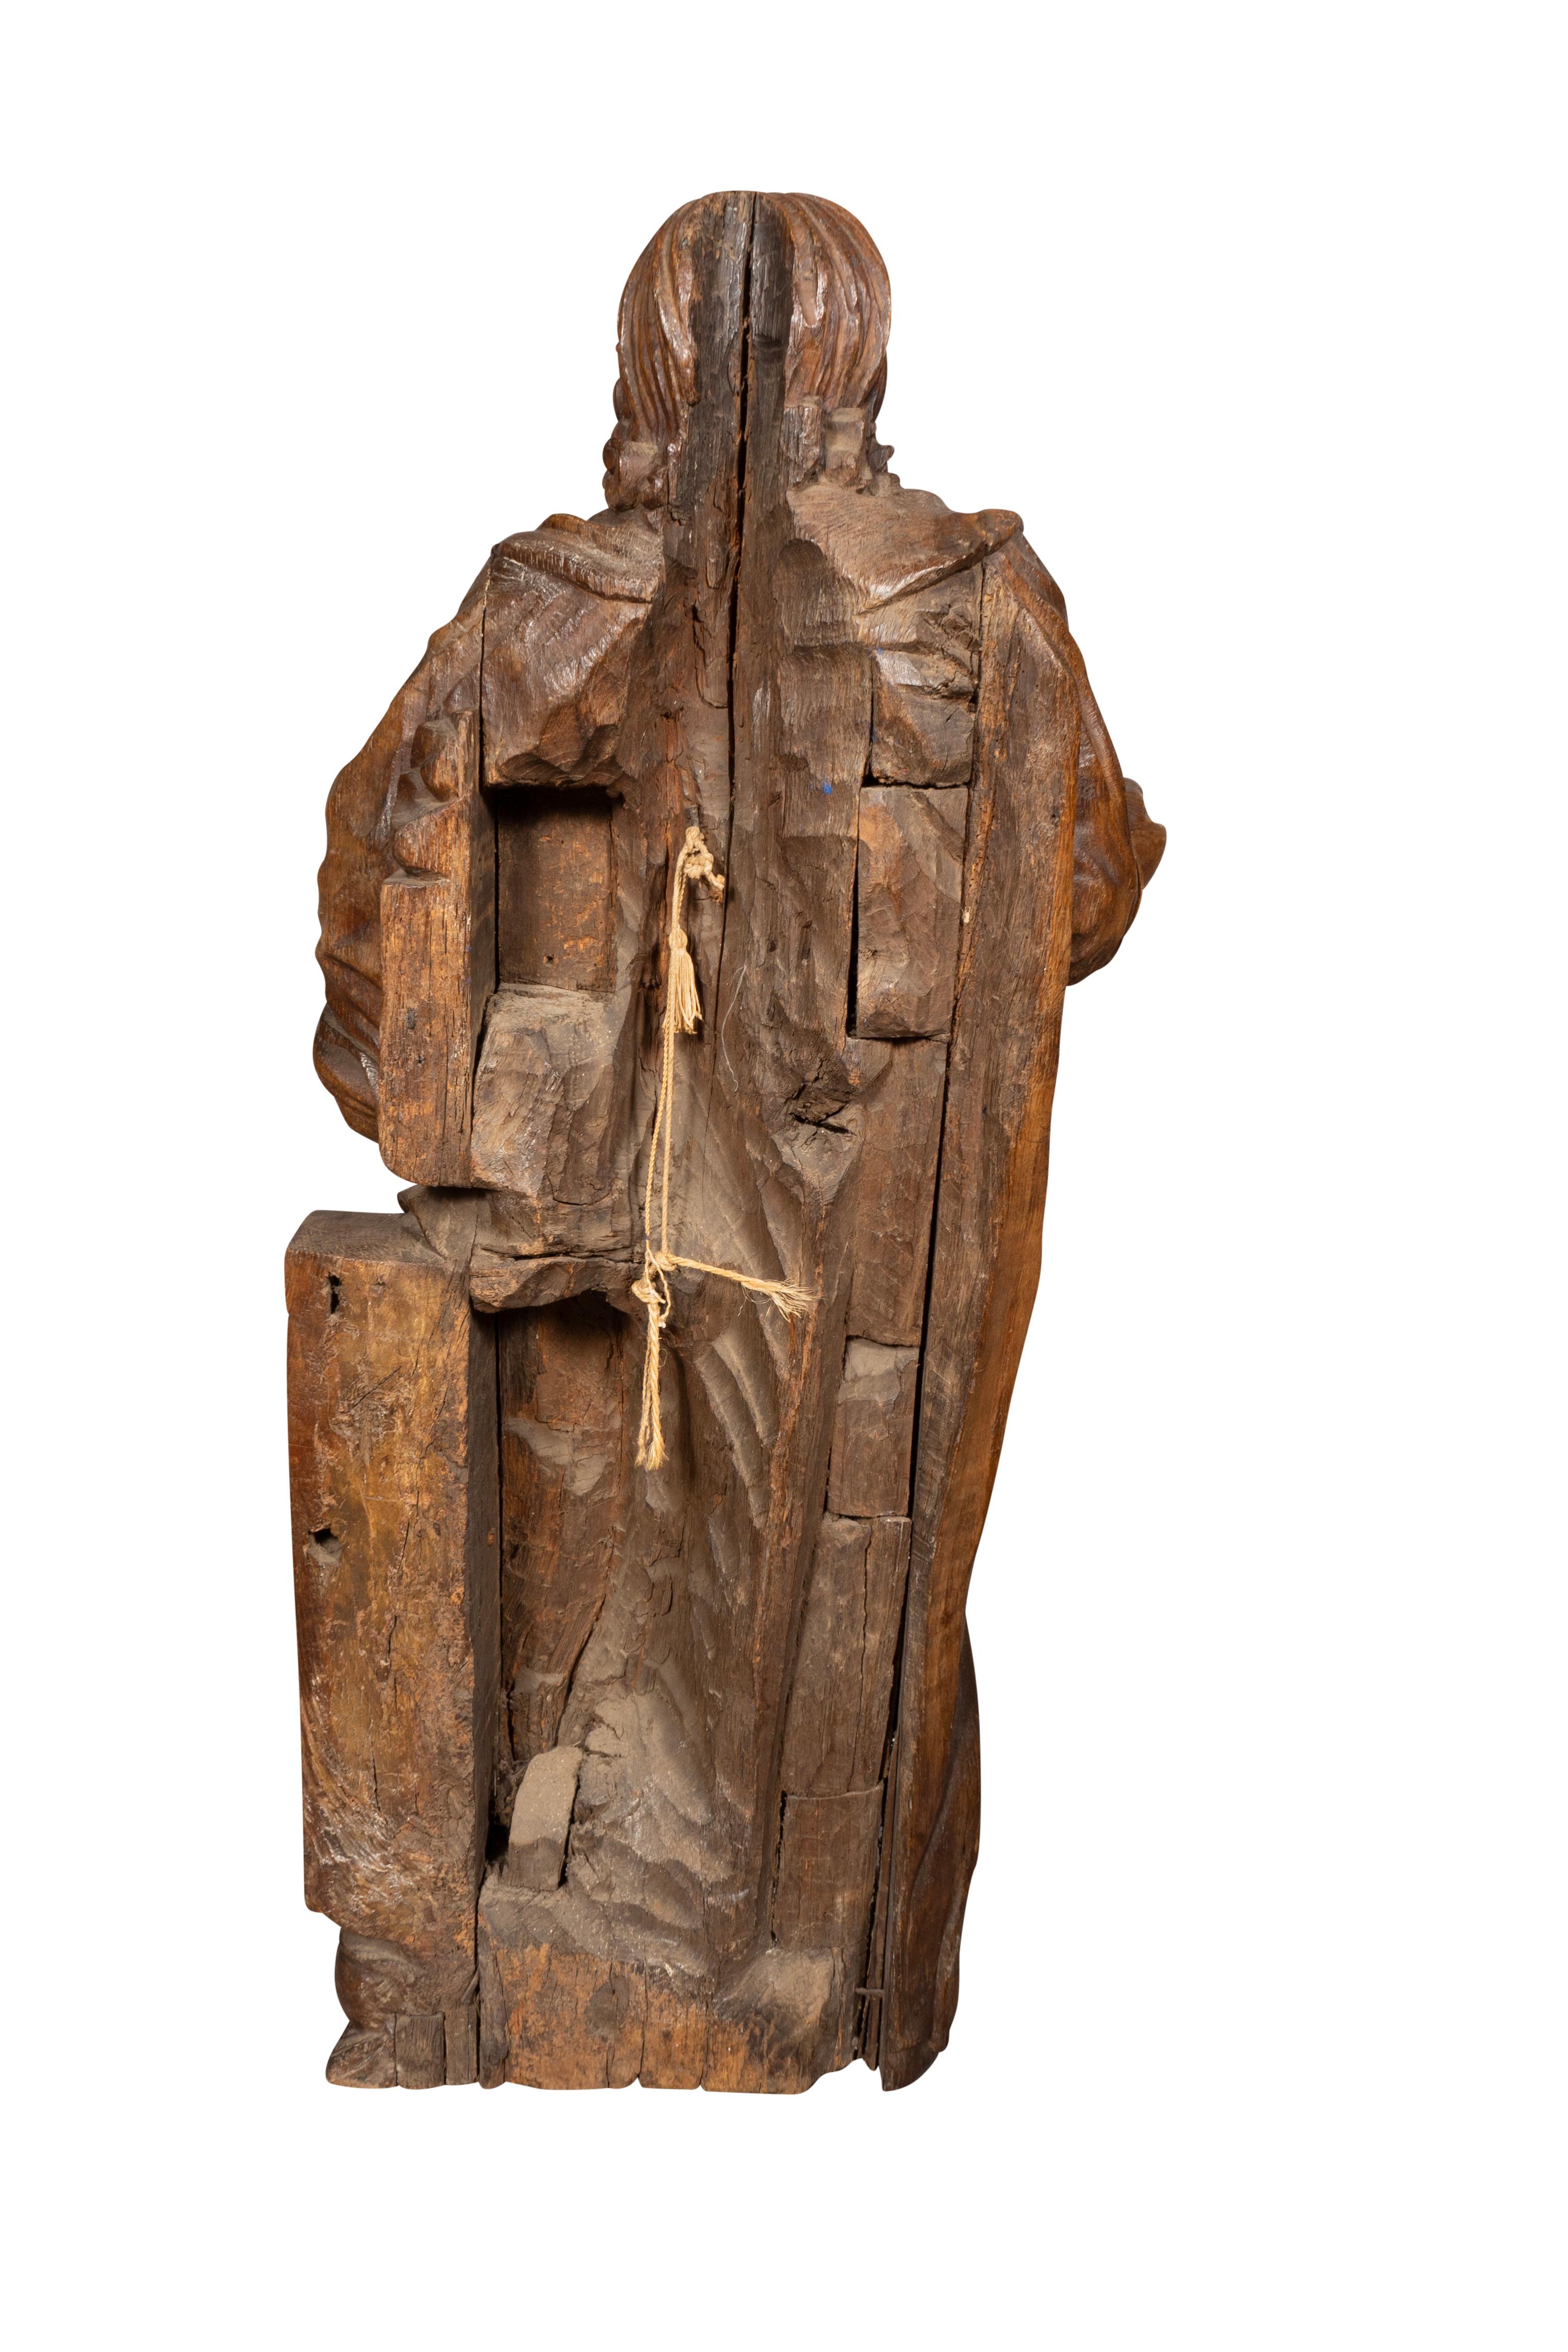 Flemish Baroque Carved Oak Figure Of A Scholar In Good Condition For Sale In Essex, MA